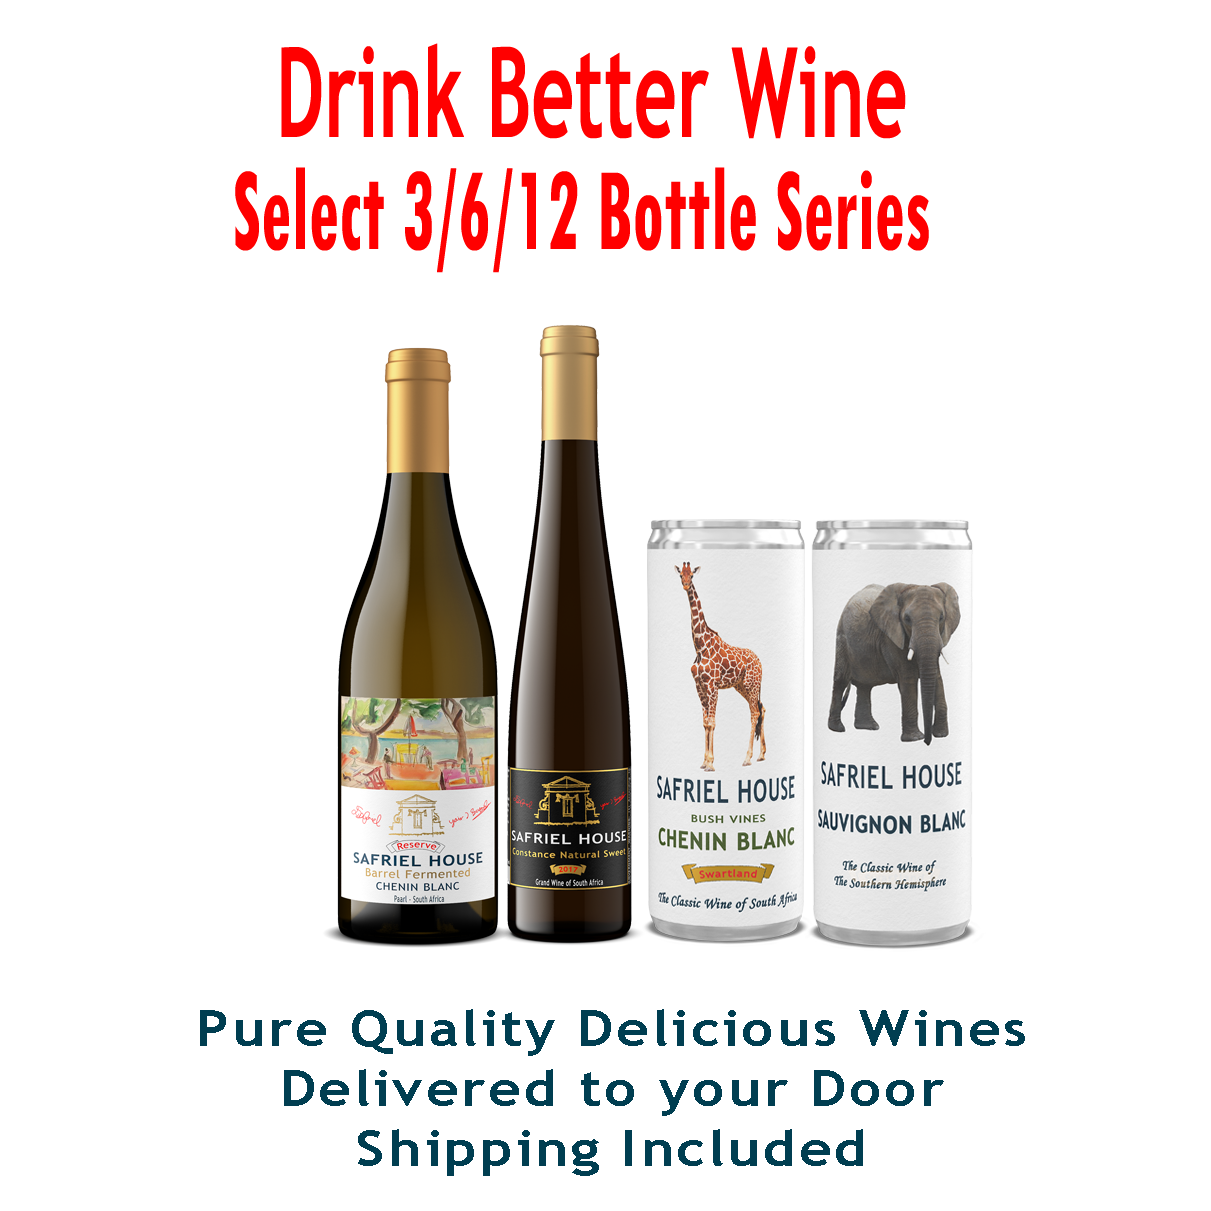 Drink Better Wine Club -"TODAY ONLY" ENTER DISCOUNT CODE 'WMB20' AT CHECKOUT